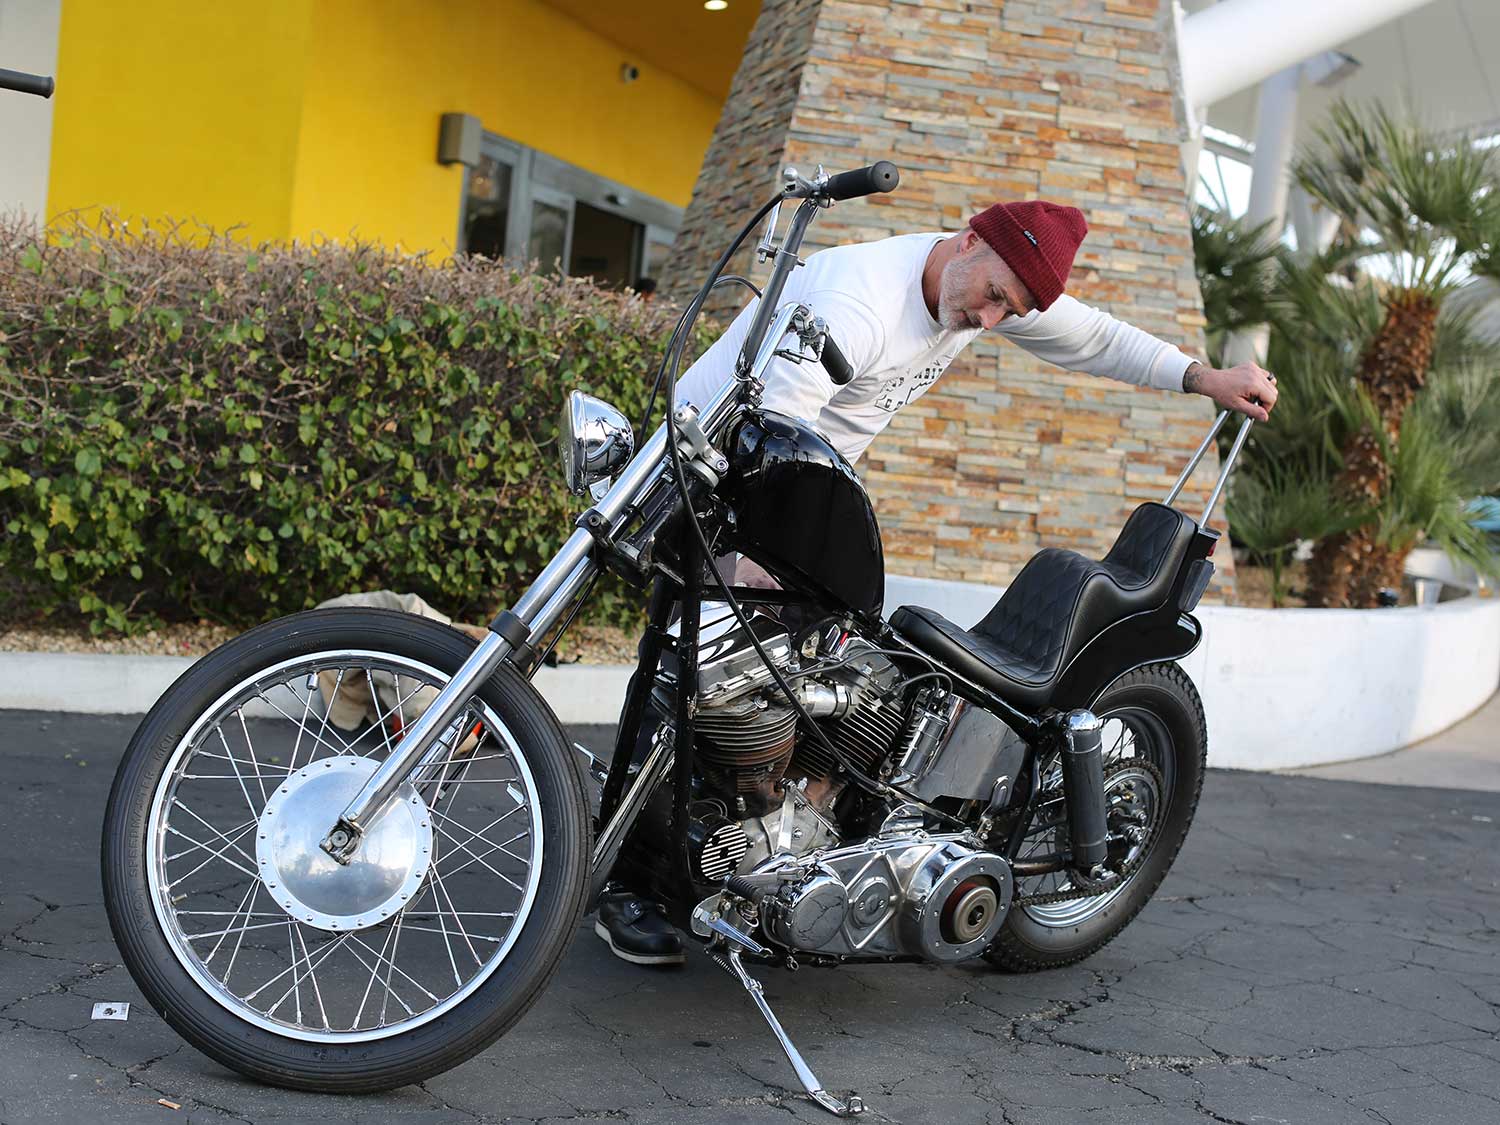 Crazy Frank-style Panhead chopper getting ready to leave the show for the night.